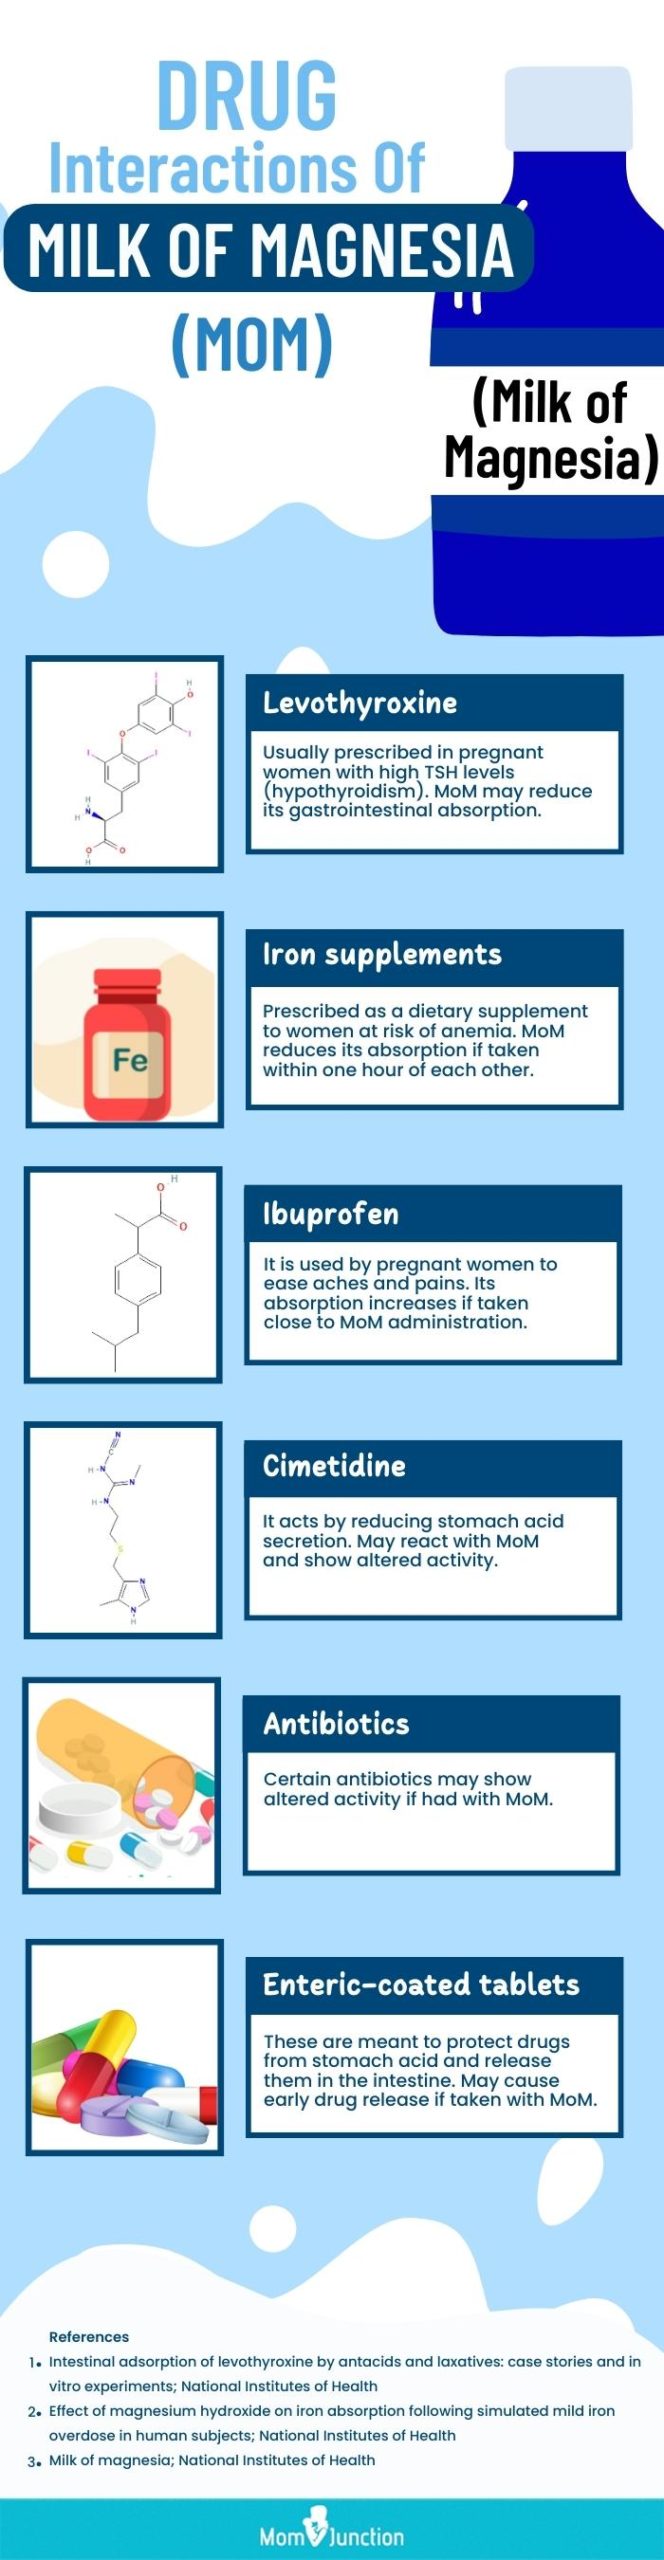 drug interactions of milk of magnesia (MoM)(infographic)